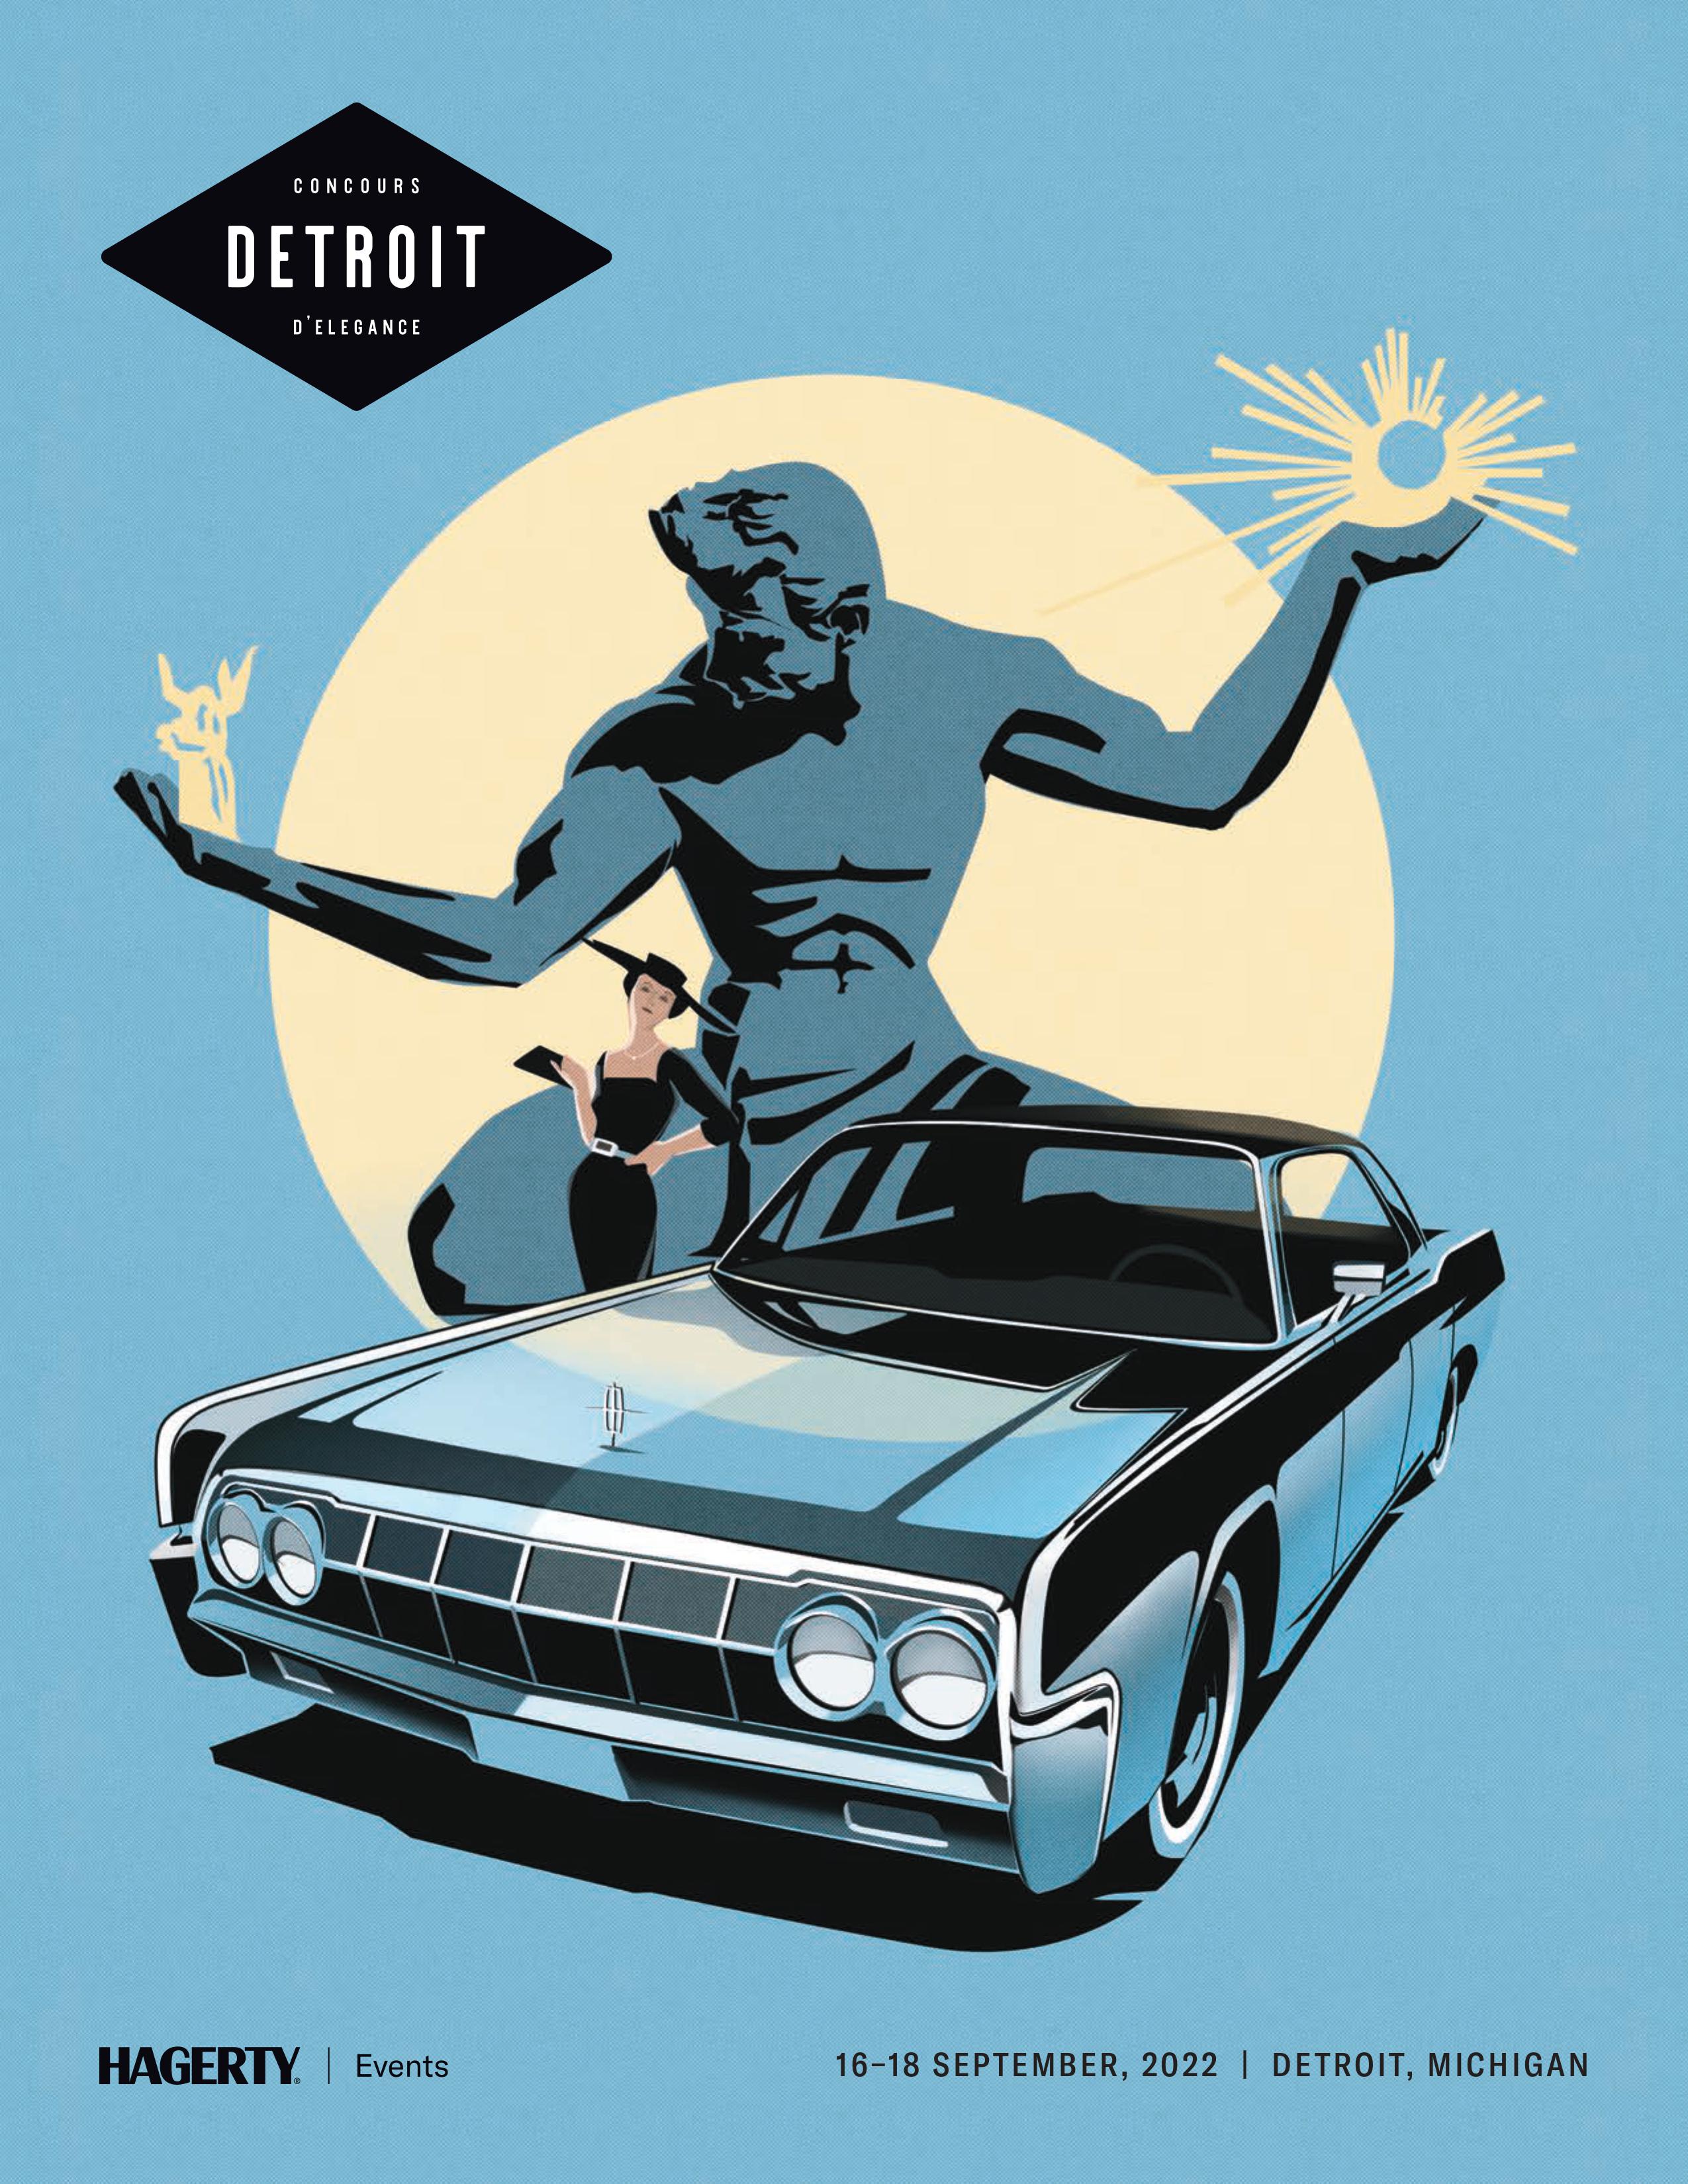 Detroit Concours 2022 Program Cover Artwork by Chris Keeyoung Ban